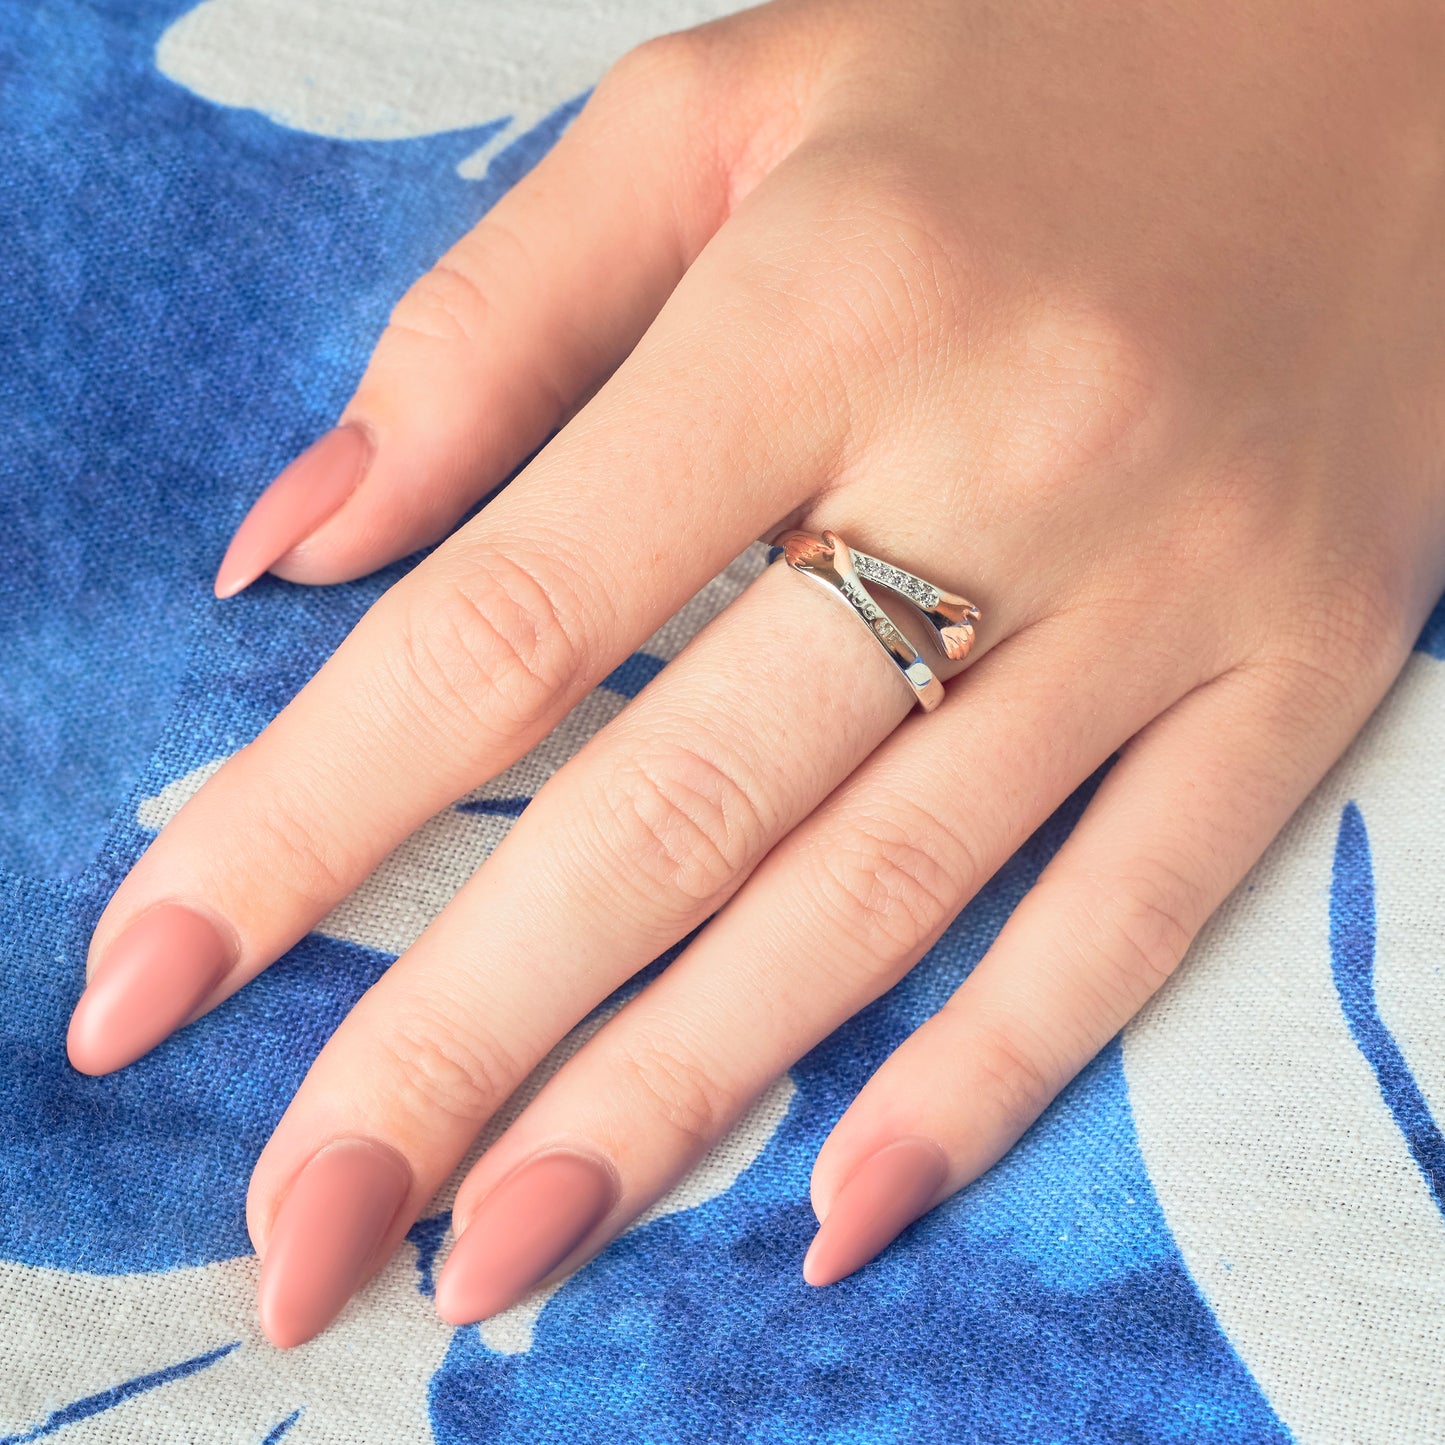 Silver and Rose Gold Closed Hug me Ring